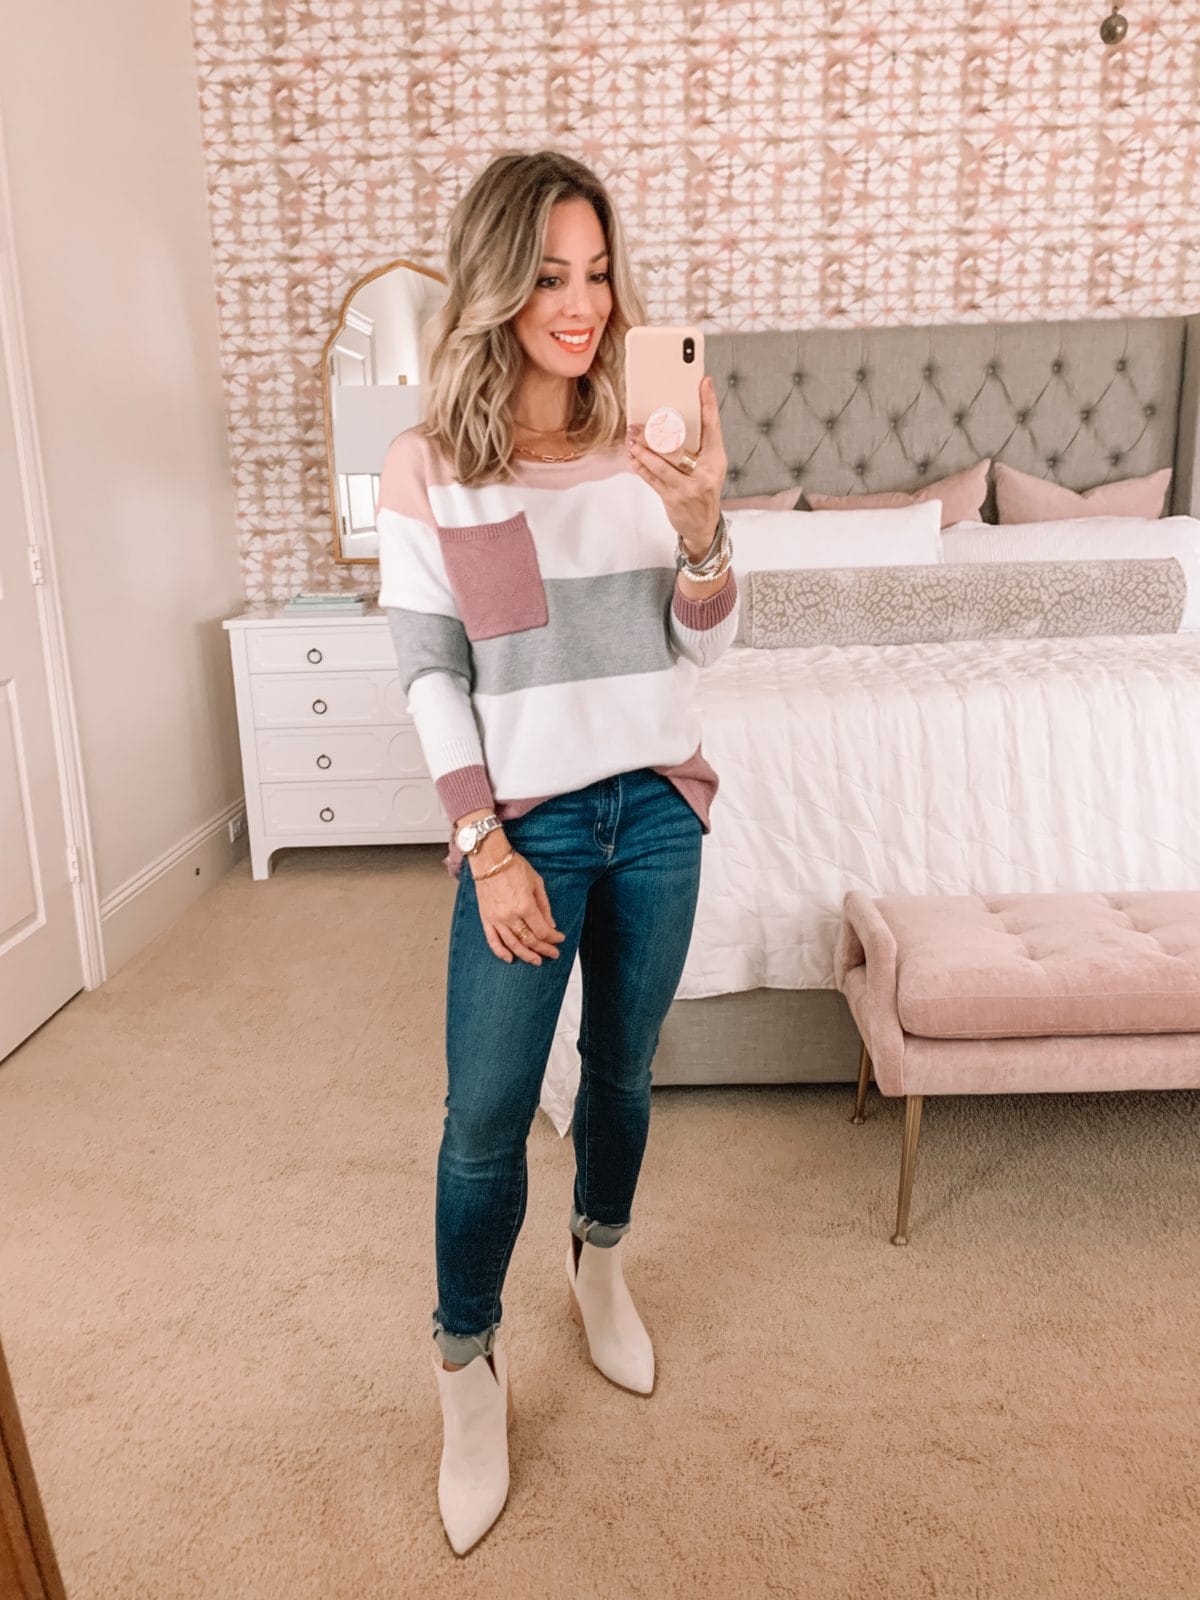 Amazon Fashion Faves, Coloblock Sweater with Pocket, Jeans, Booties 